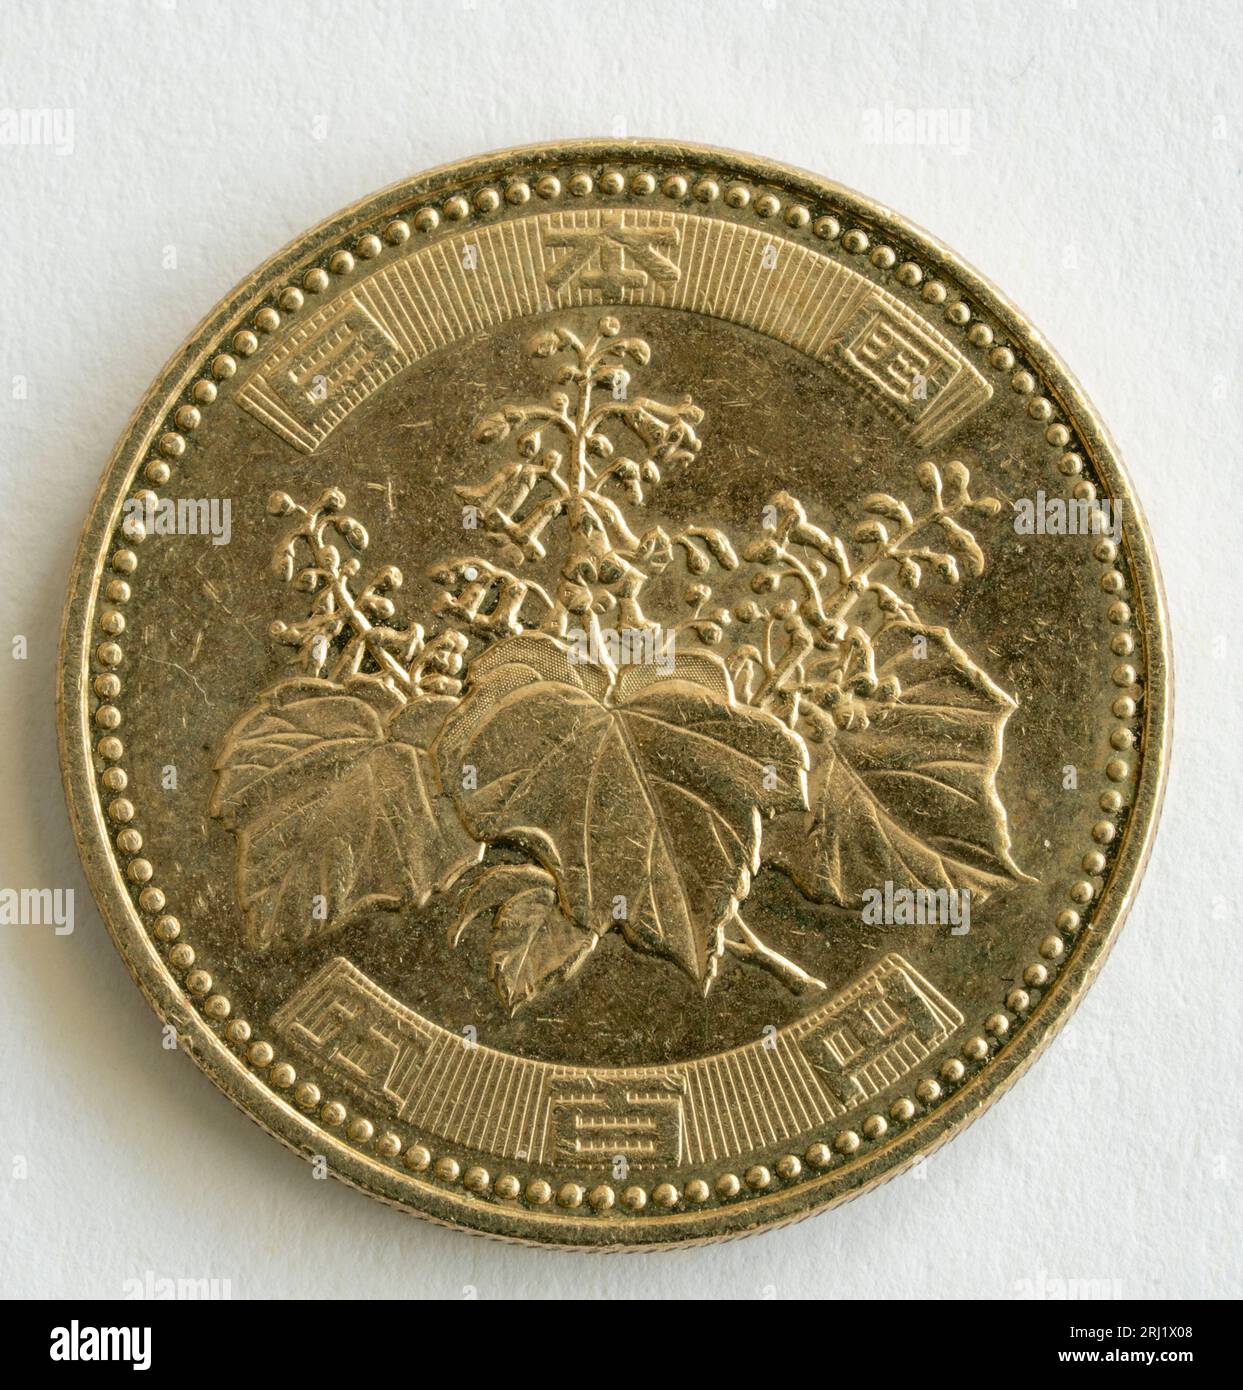 Japanese special 500 yen coin minted for the Showa Emperor, Hirohito. Features a paulownia plant with authority above and the value in Kanji below. Stock Photo